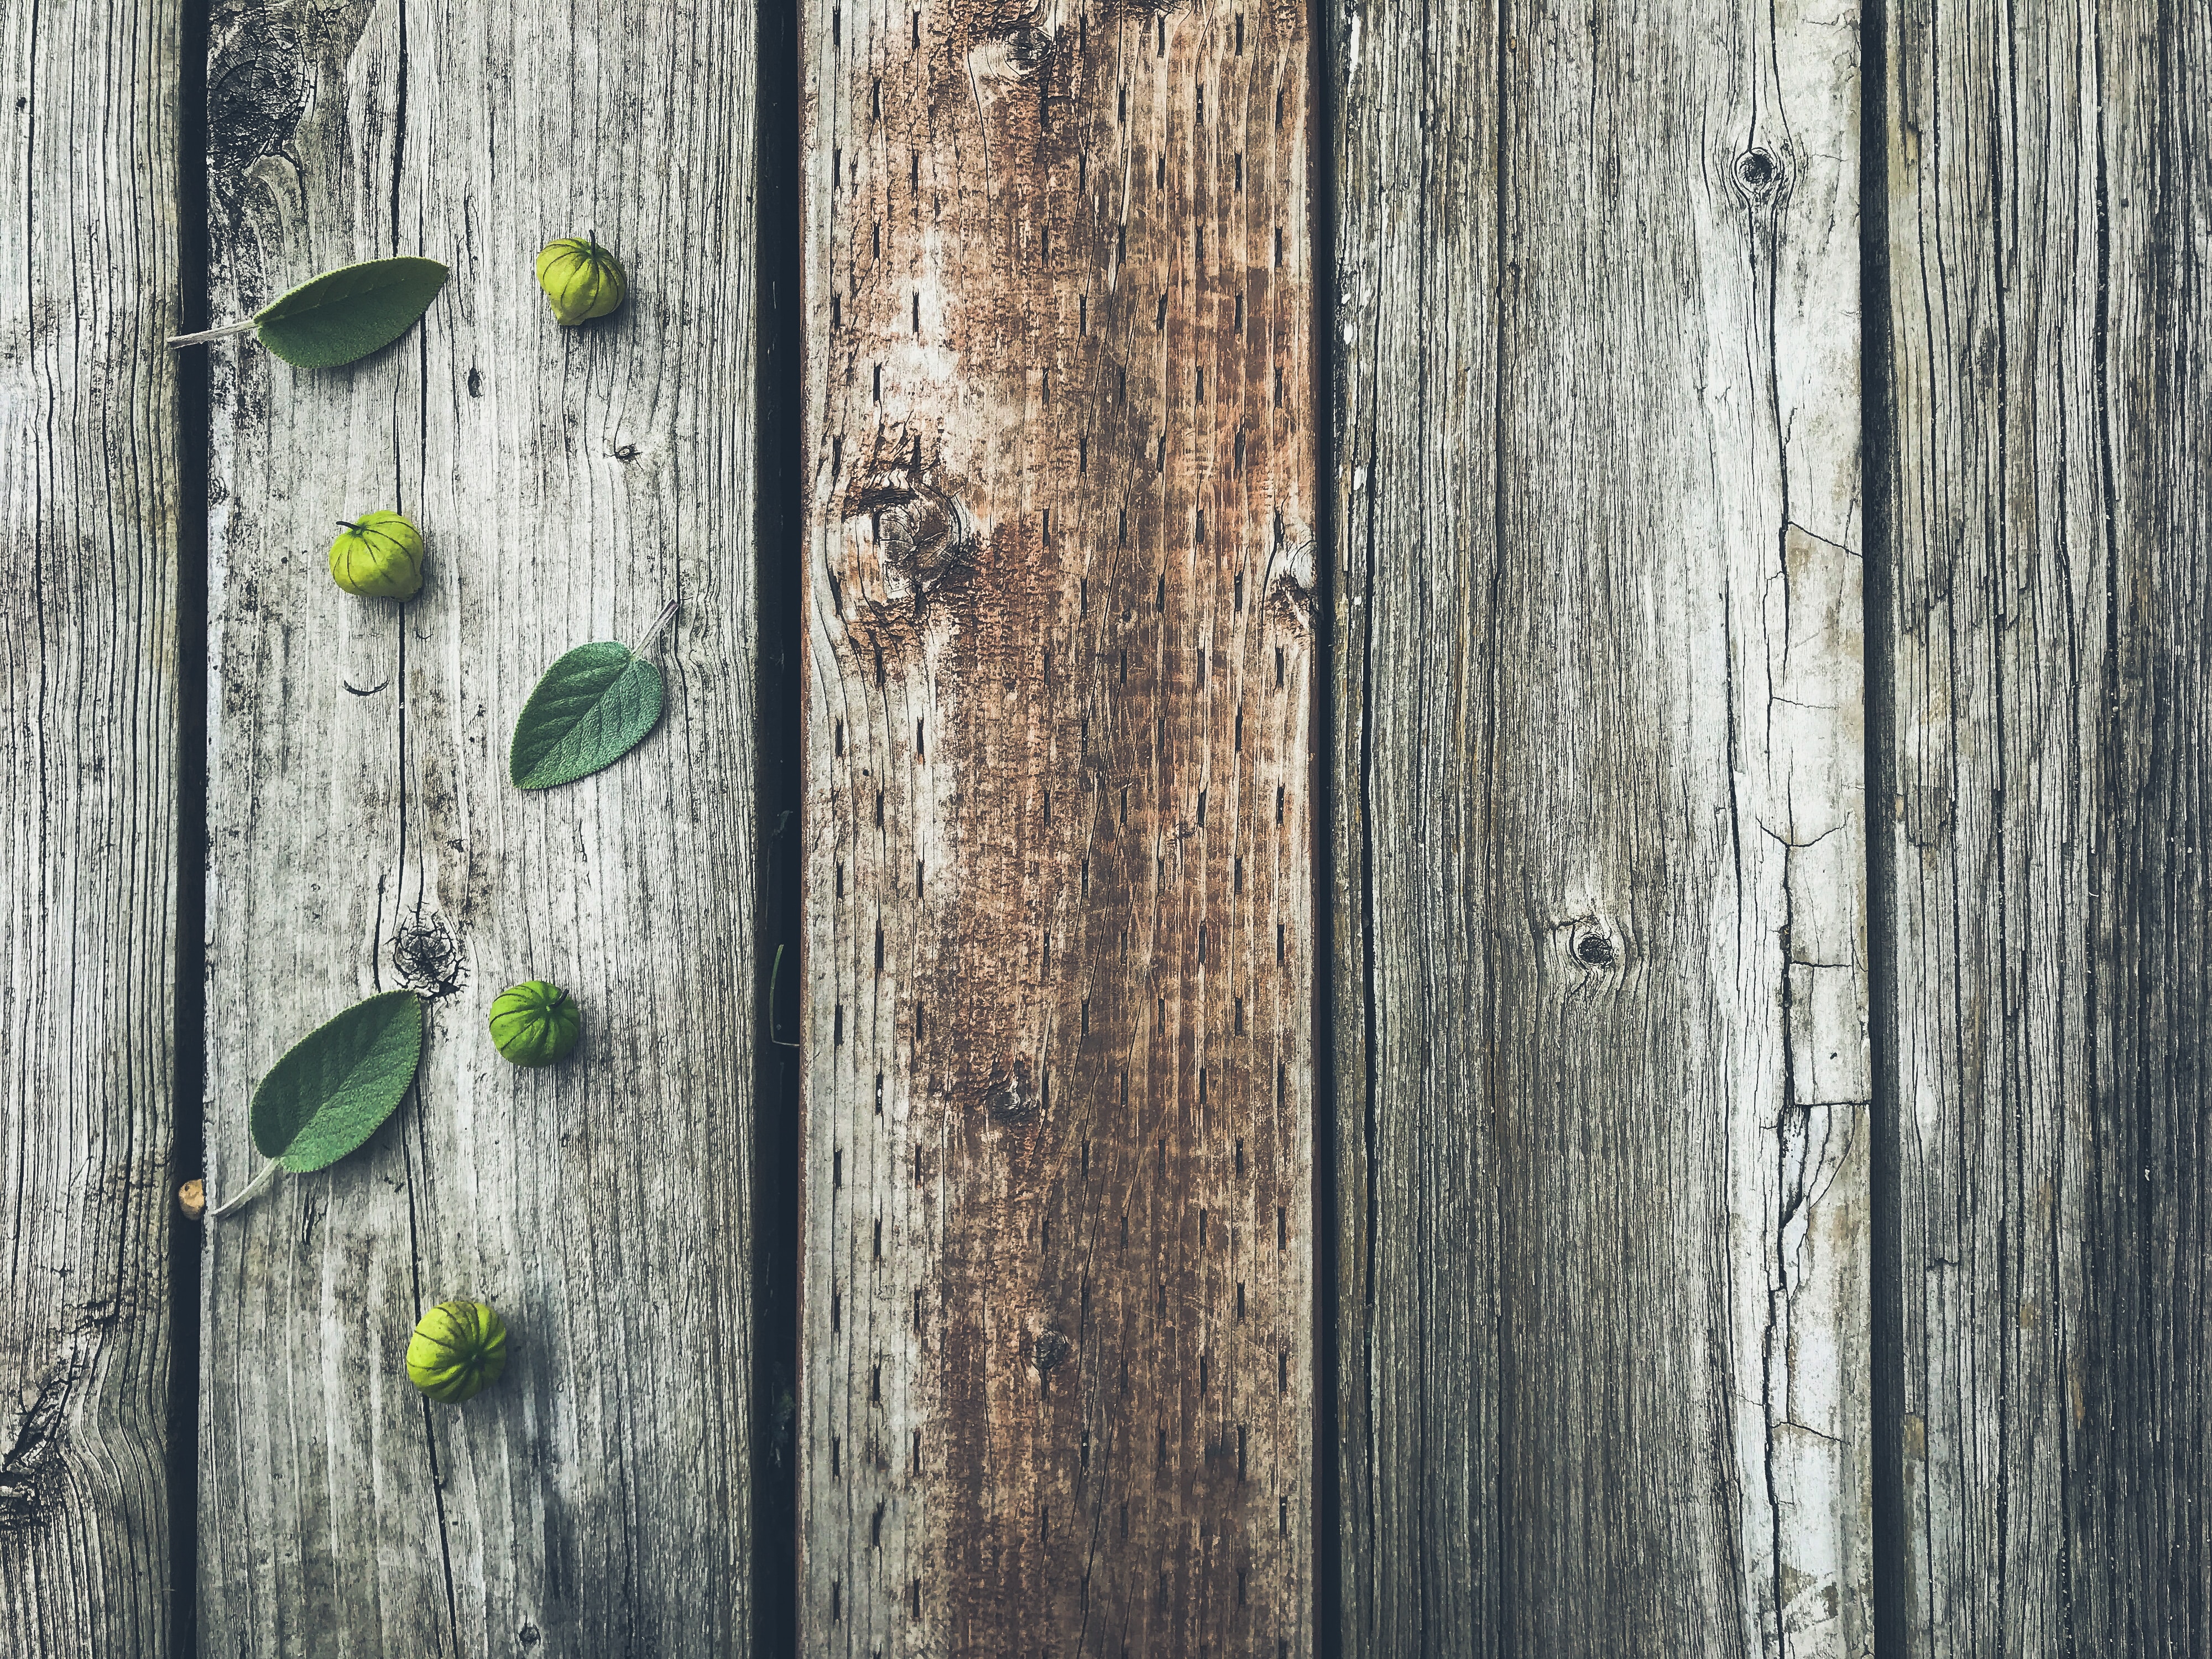 android planks, wooden, leaves, wood, tree, texture, textures, fruit, board